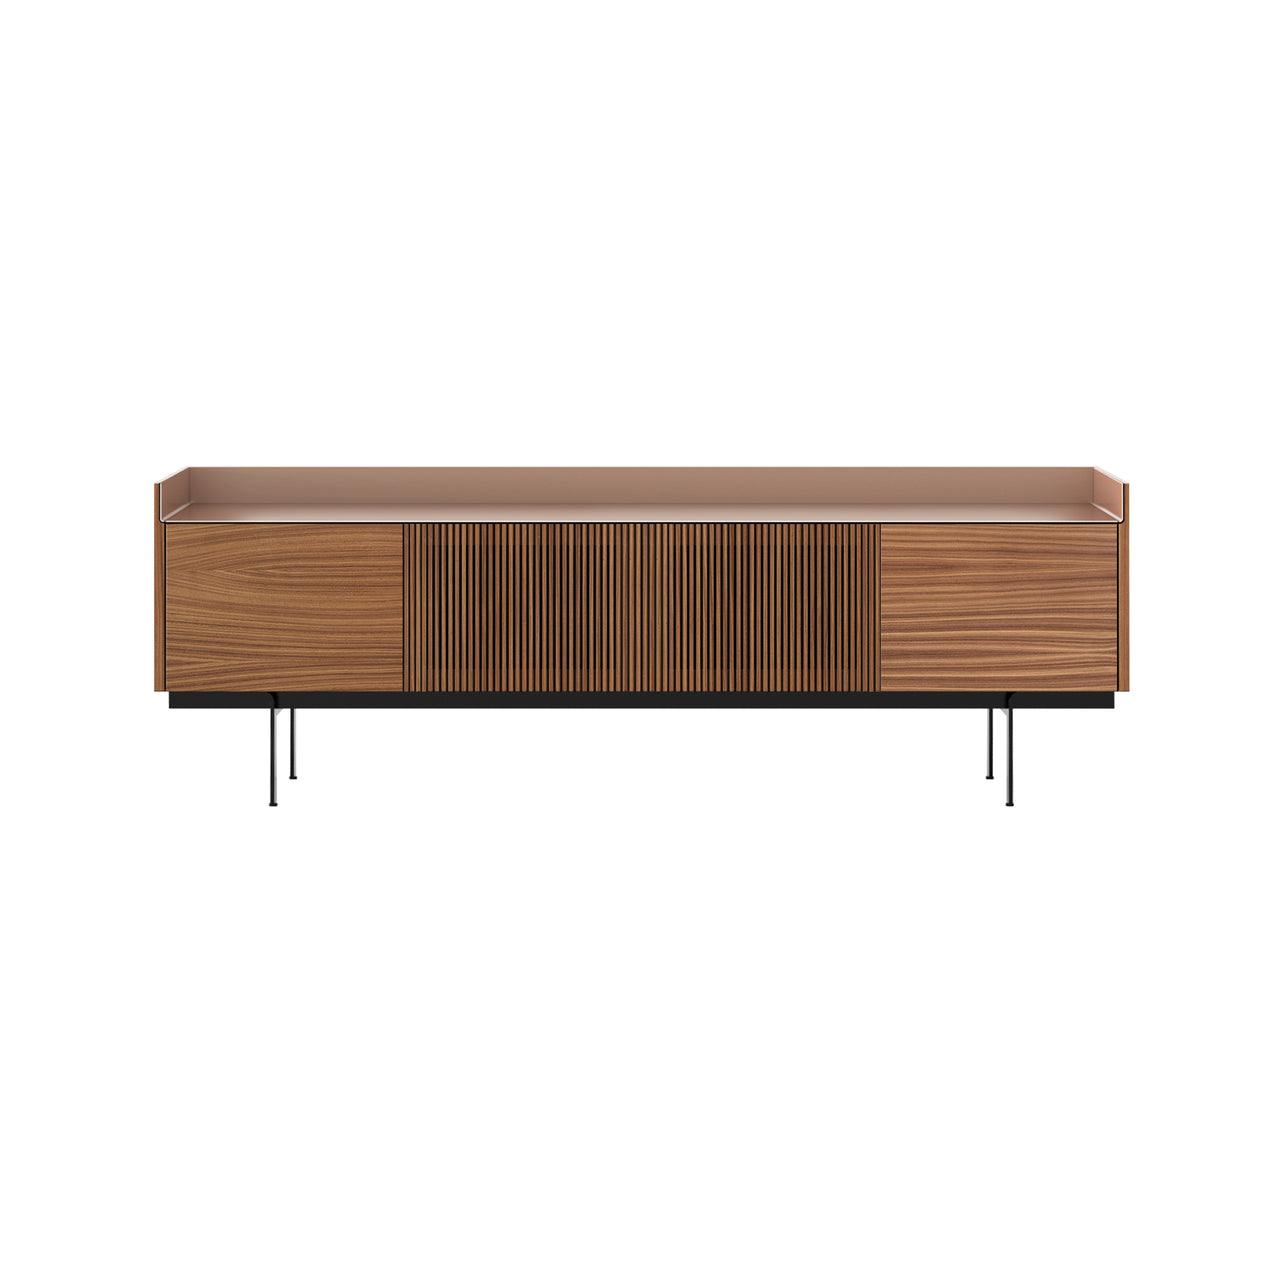 Stockholm Technic Sideboard: STH403 + Walnut Stained Walnut + Anodized Aluminum Pale Rose + Black